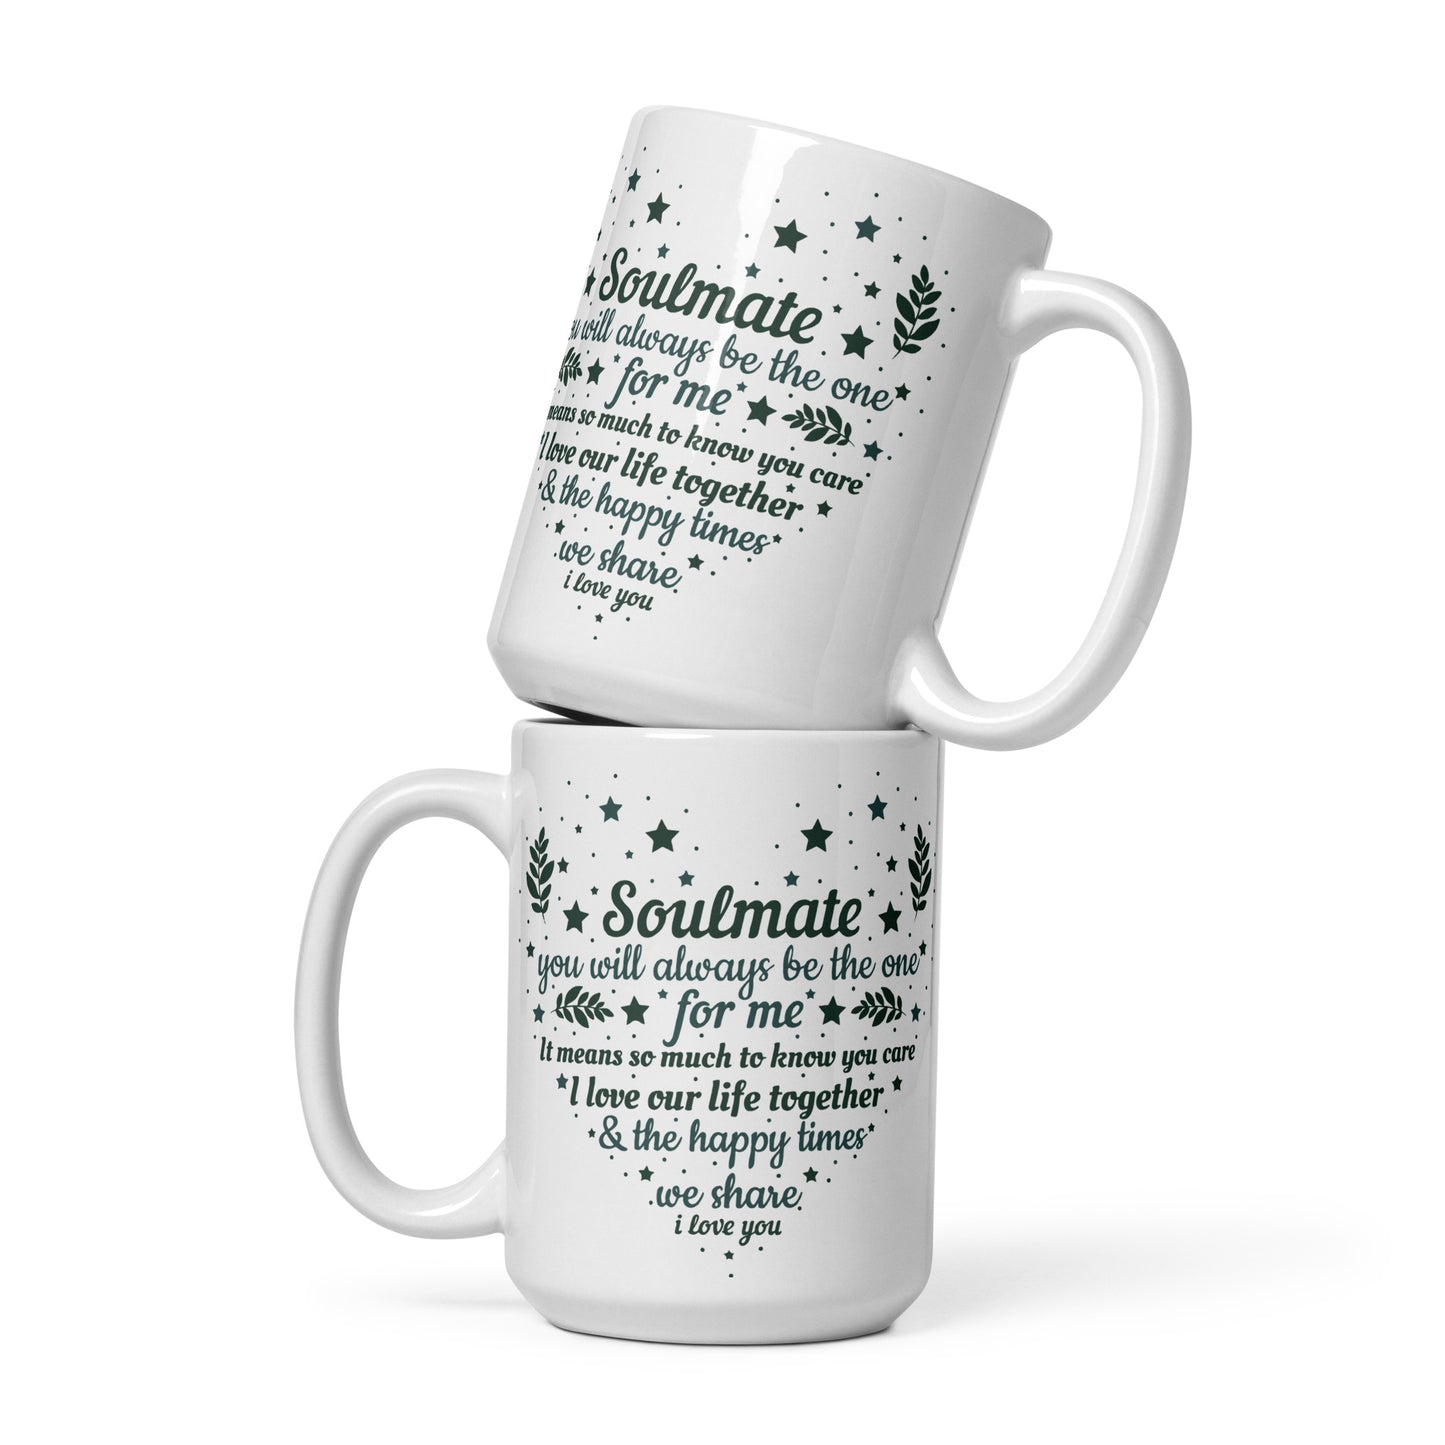 To my Soulmate you will always be_ Personalized Mug Gift Customized Mug Gift w Heartfelt Message